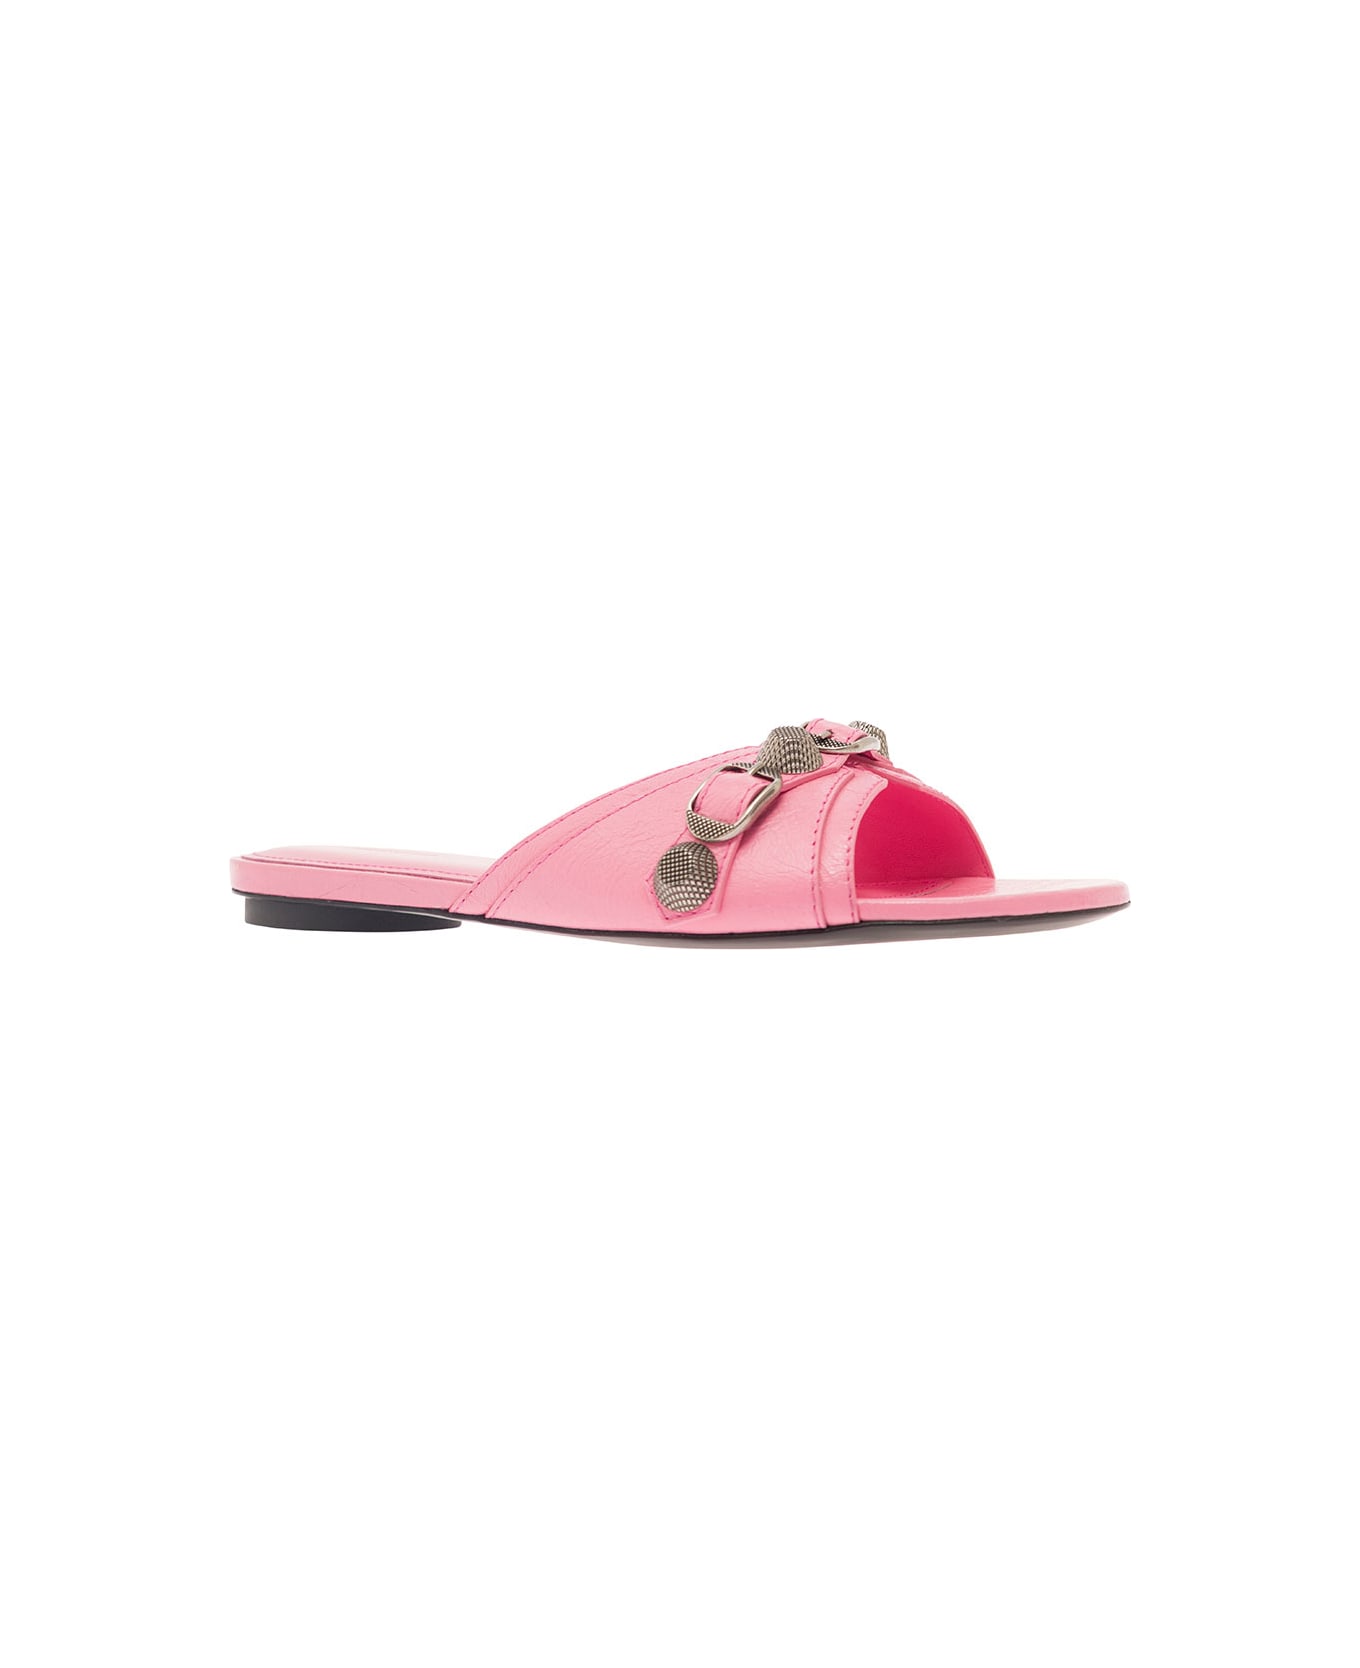 Balenciaga 'cagole' Pink Sandals With Studs And Buckles In Smooth Leather Woman - Pink サンダル